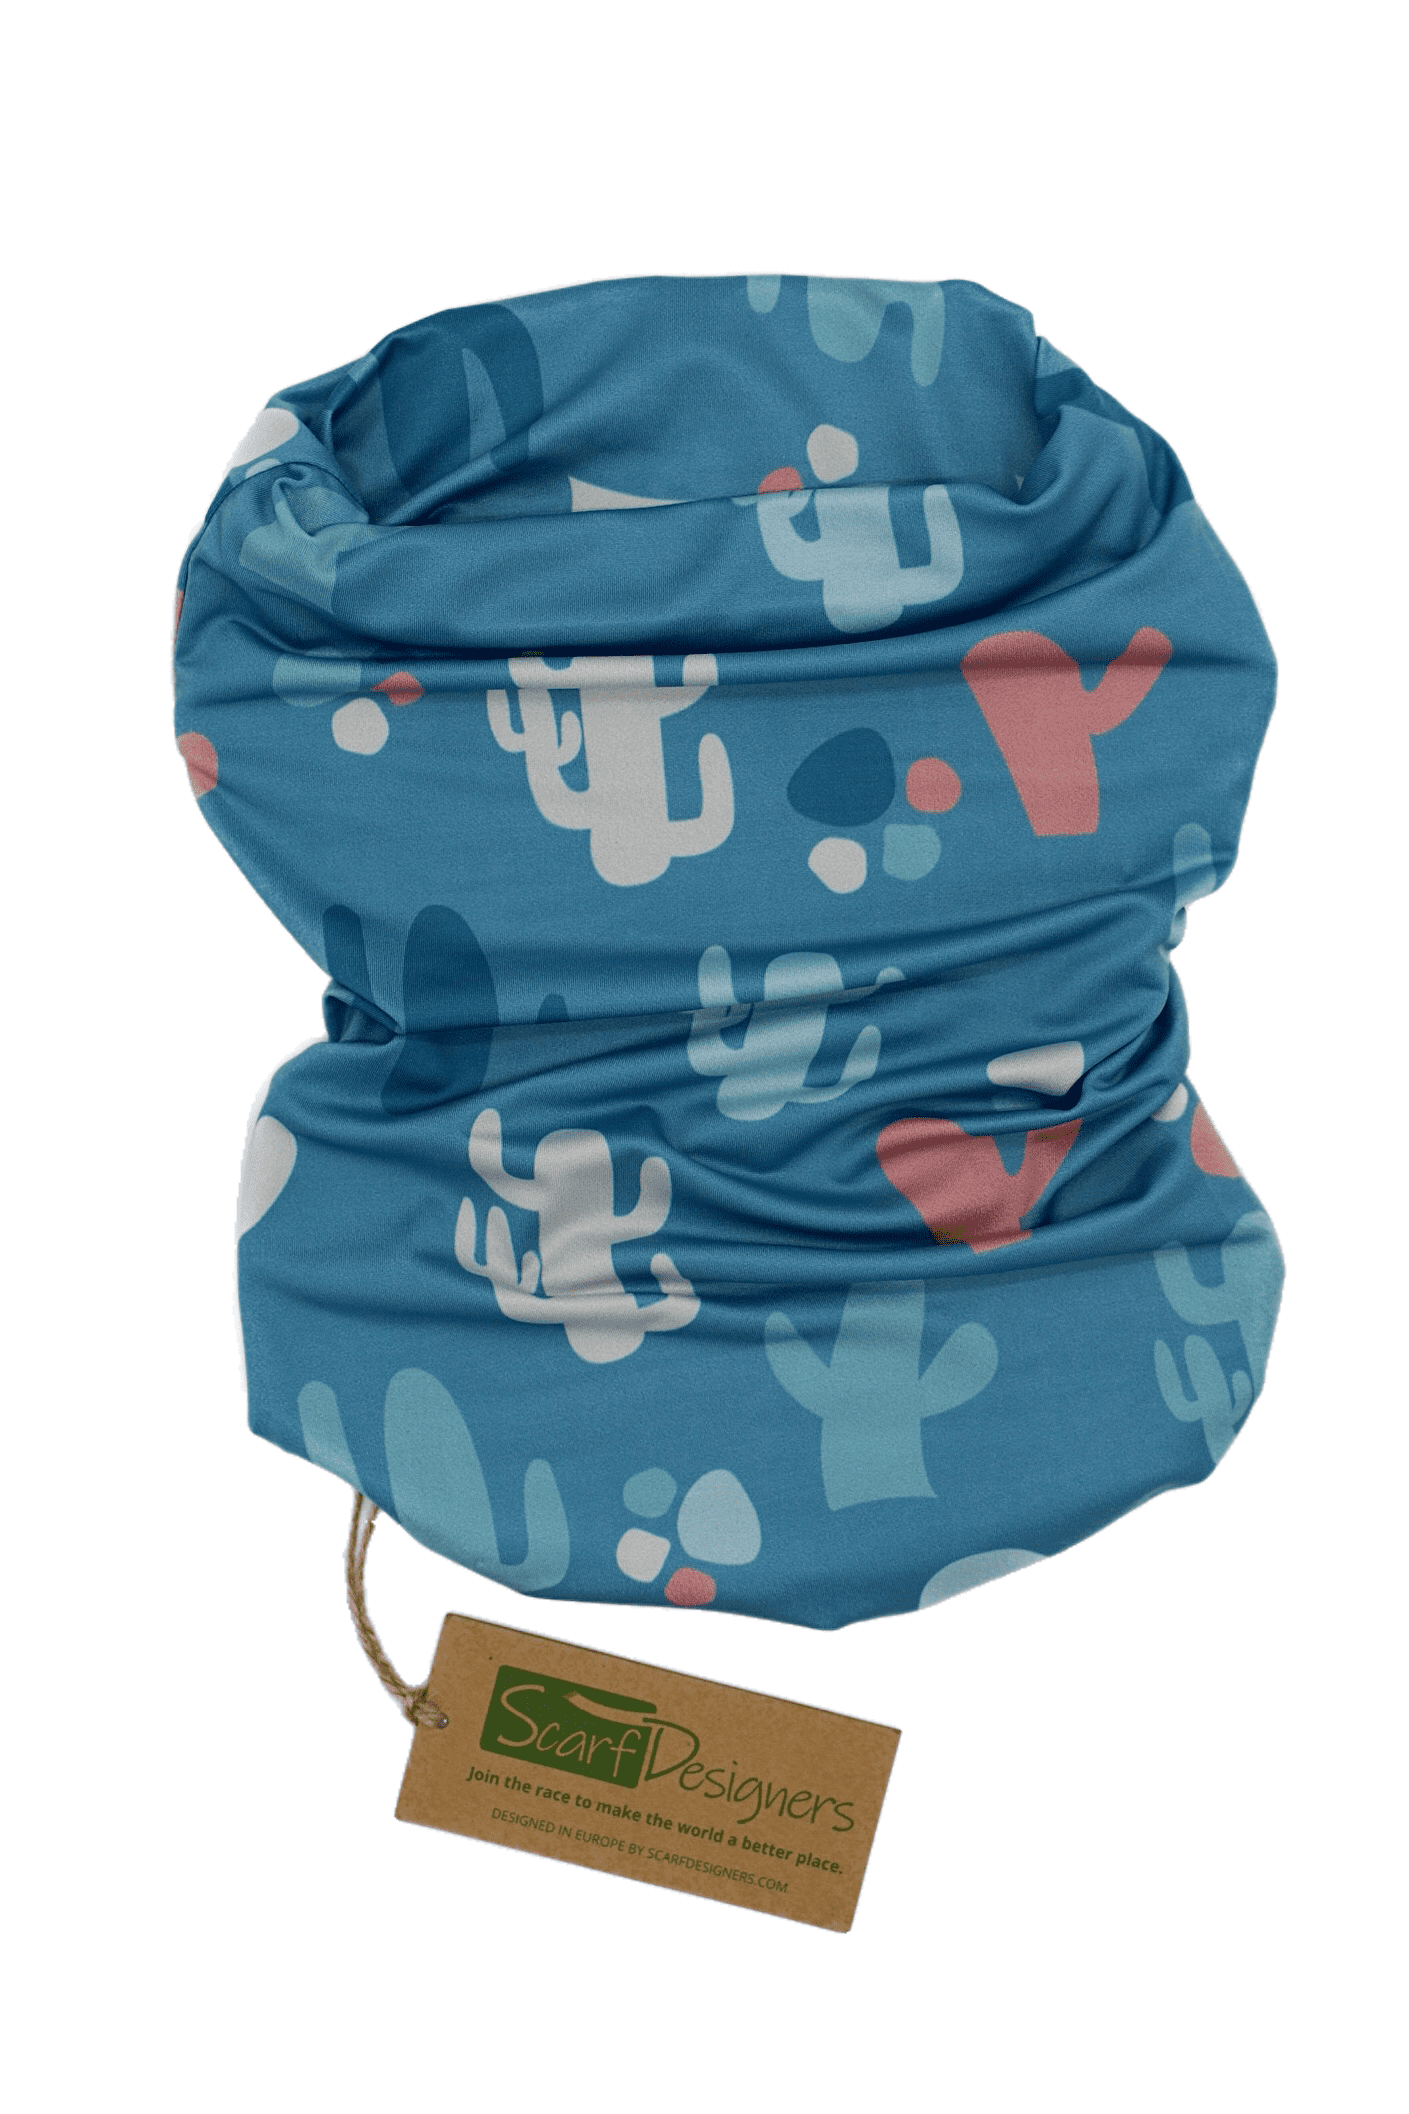 This is a unisex, multifunctional and sustainable bandana with cactus print in blue. It is made from recycled polyester which is breathable, durable, soft to touch, easy to care and fast drying material. It makes it perfectly suitable for all kinds of sports like biking, hiking, jogging or skiing. This is a versatile bandana that can be used as a scarf, face mask, bandana or headband and it is also known as tube scarf, neck gaiter or face mask. It is a vegan product certified by PETA.